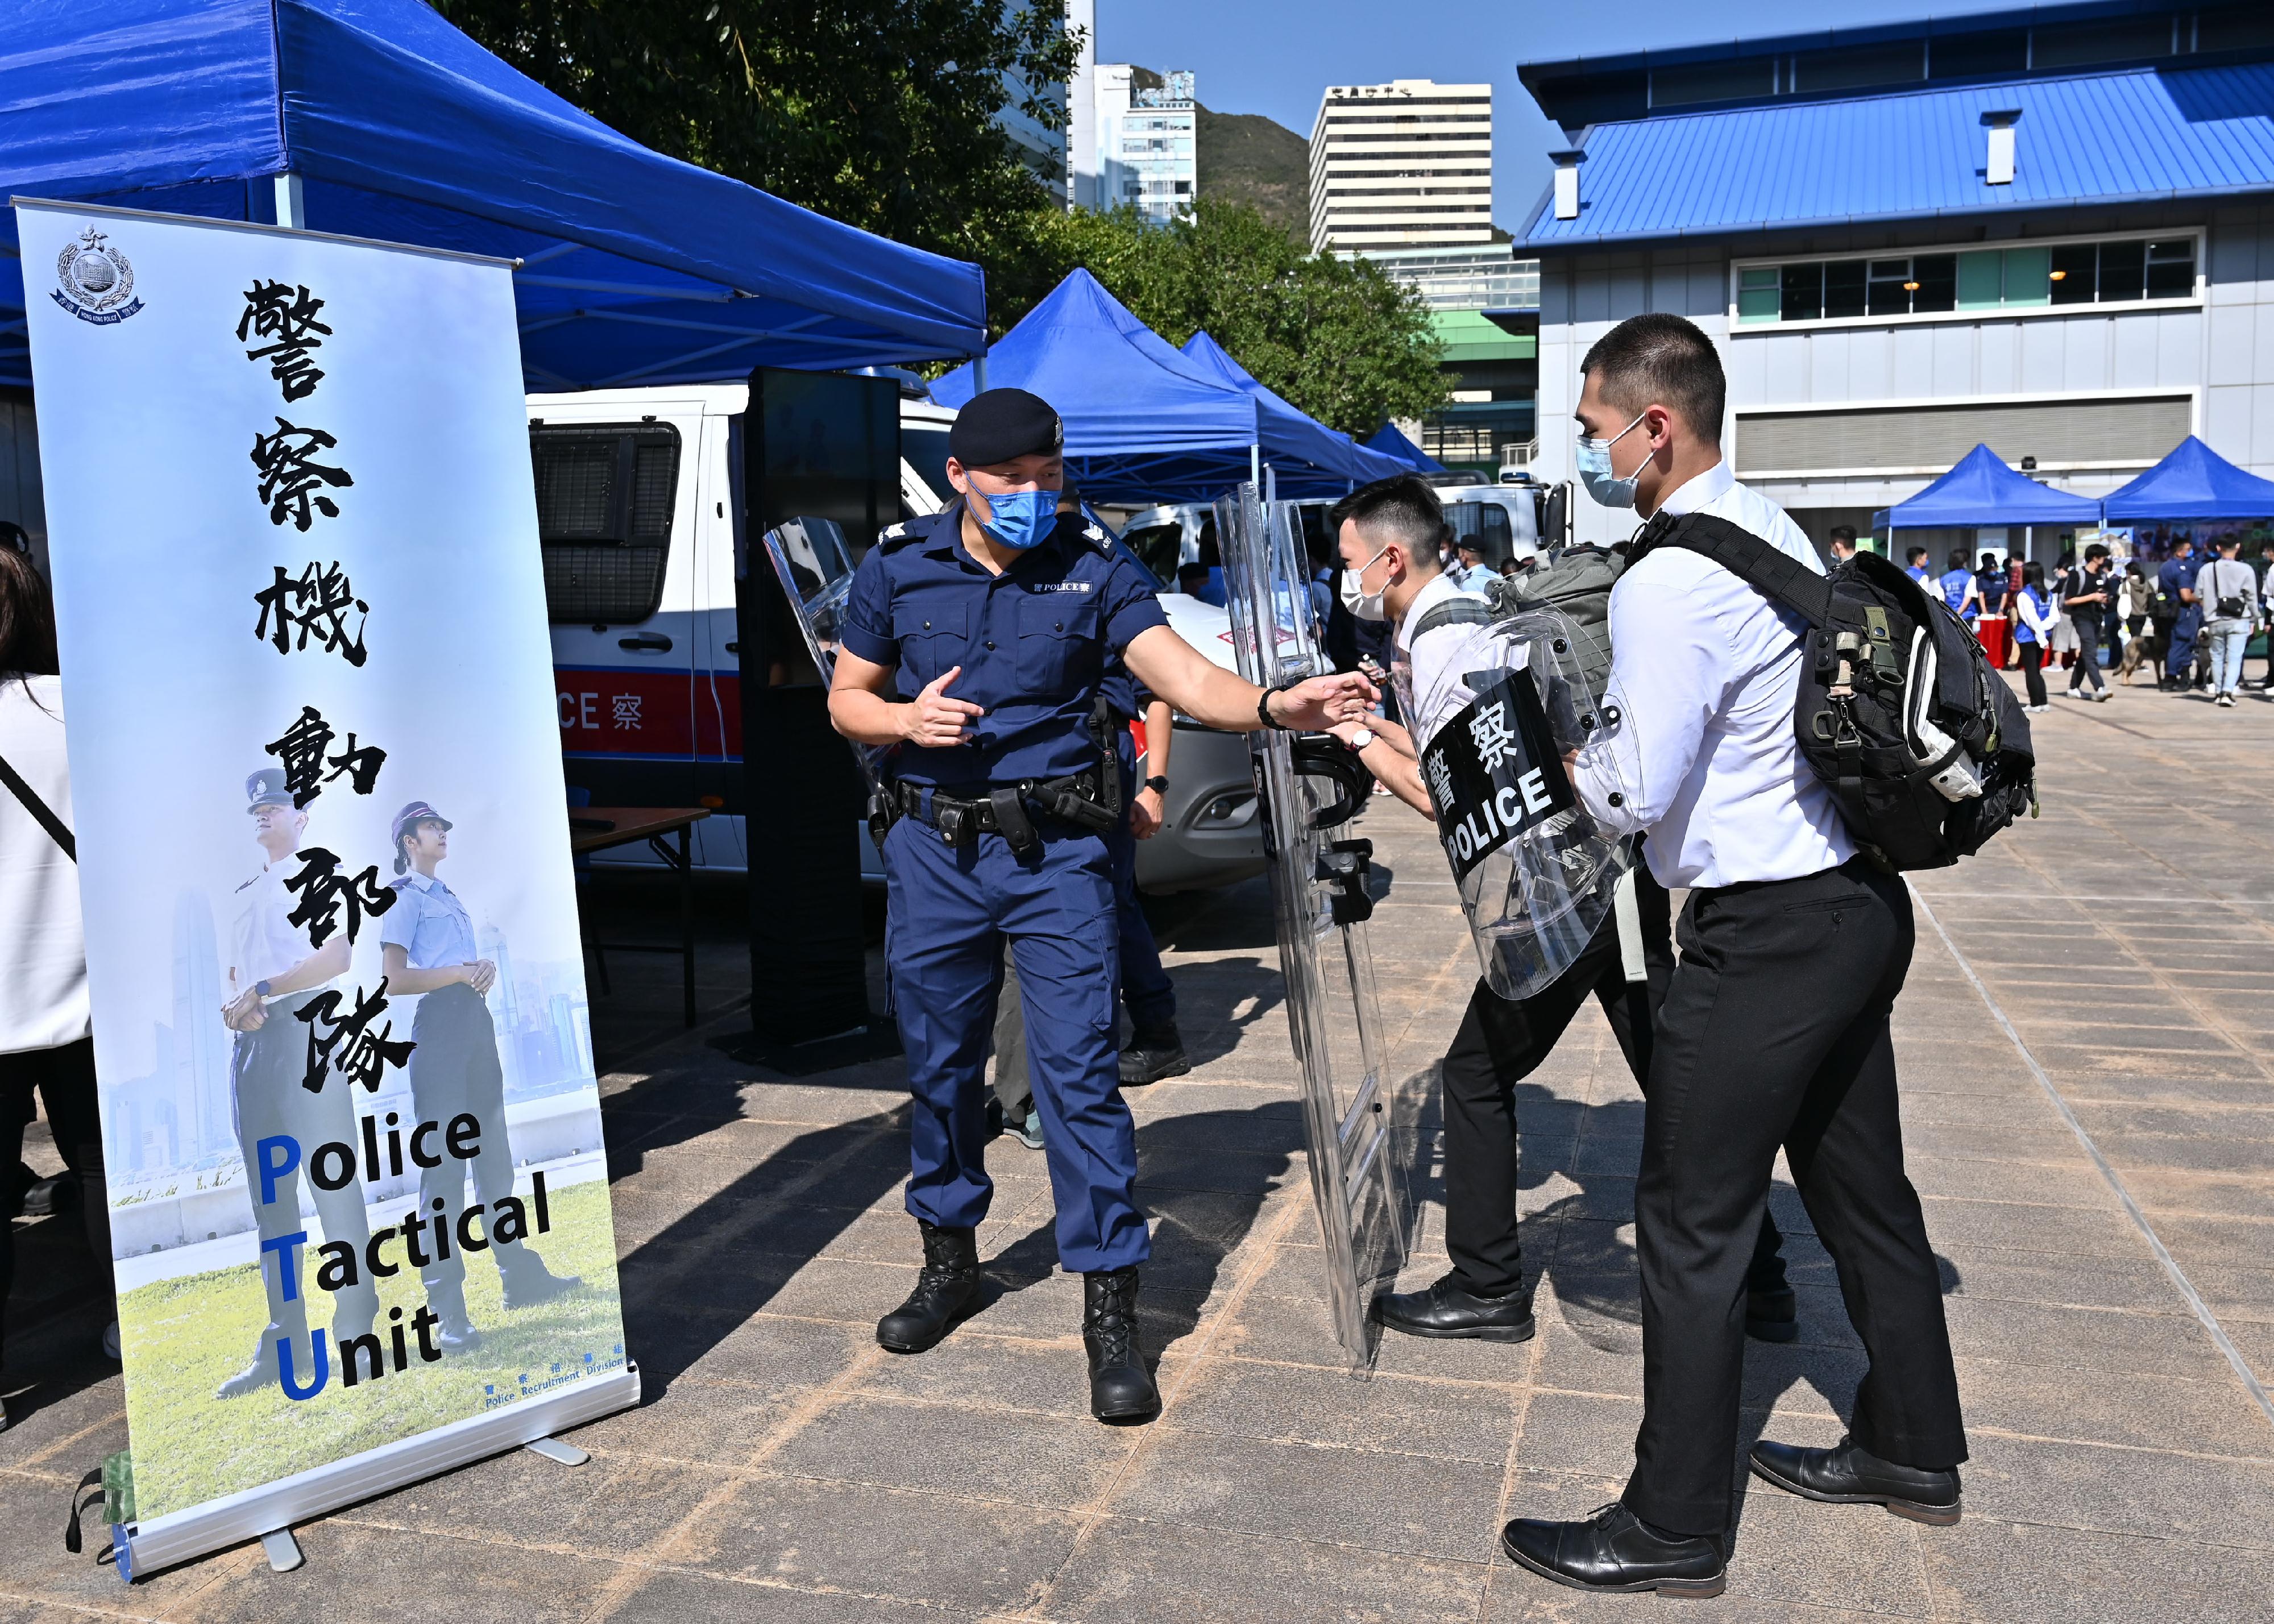 The Hong Kong Police Force today (December 12) held the Police Recruitment Experience and Assessment Day at the Hong Kong Police College. Photo shows an officer from the Police Tactical Unit introducing his team's work to participants.